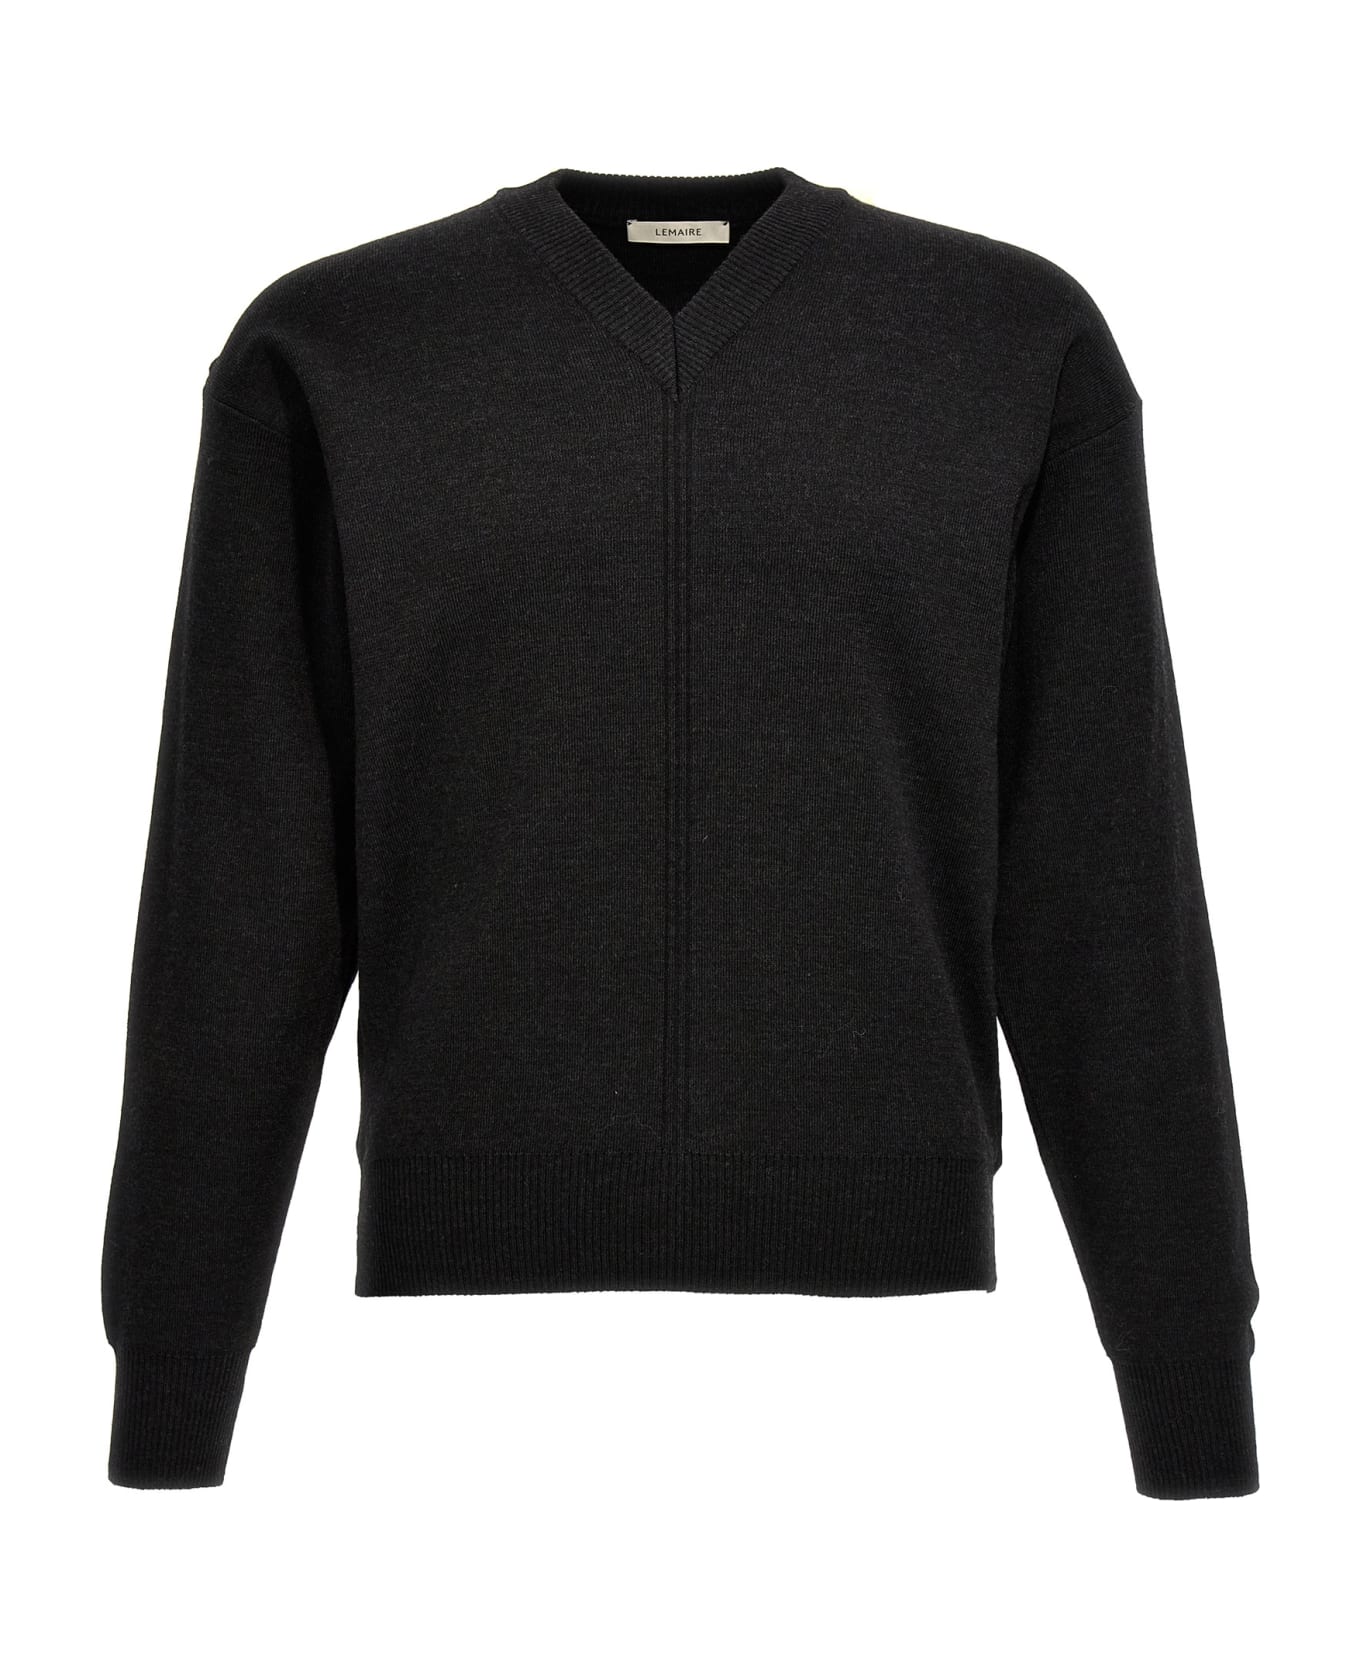 Lemaire V-neck Sweater - Antracite